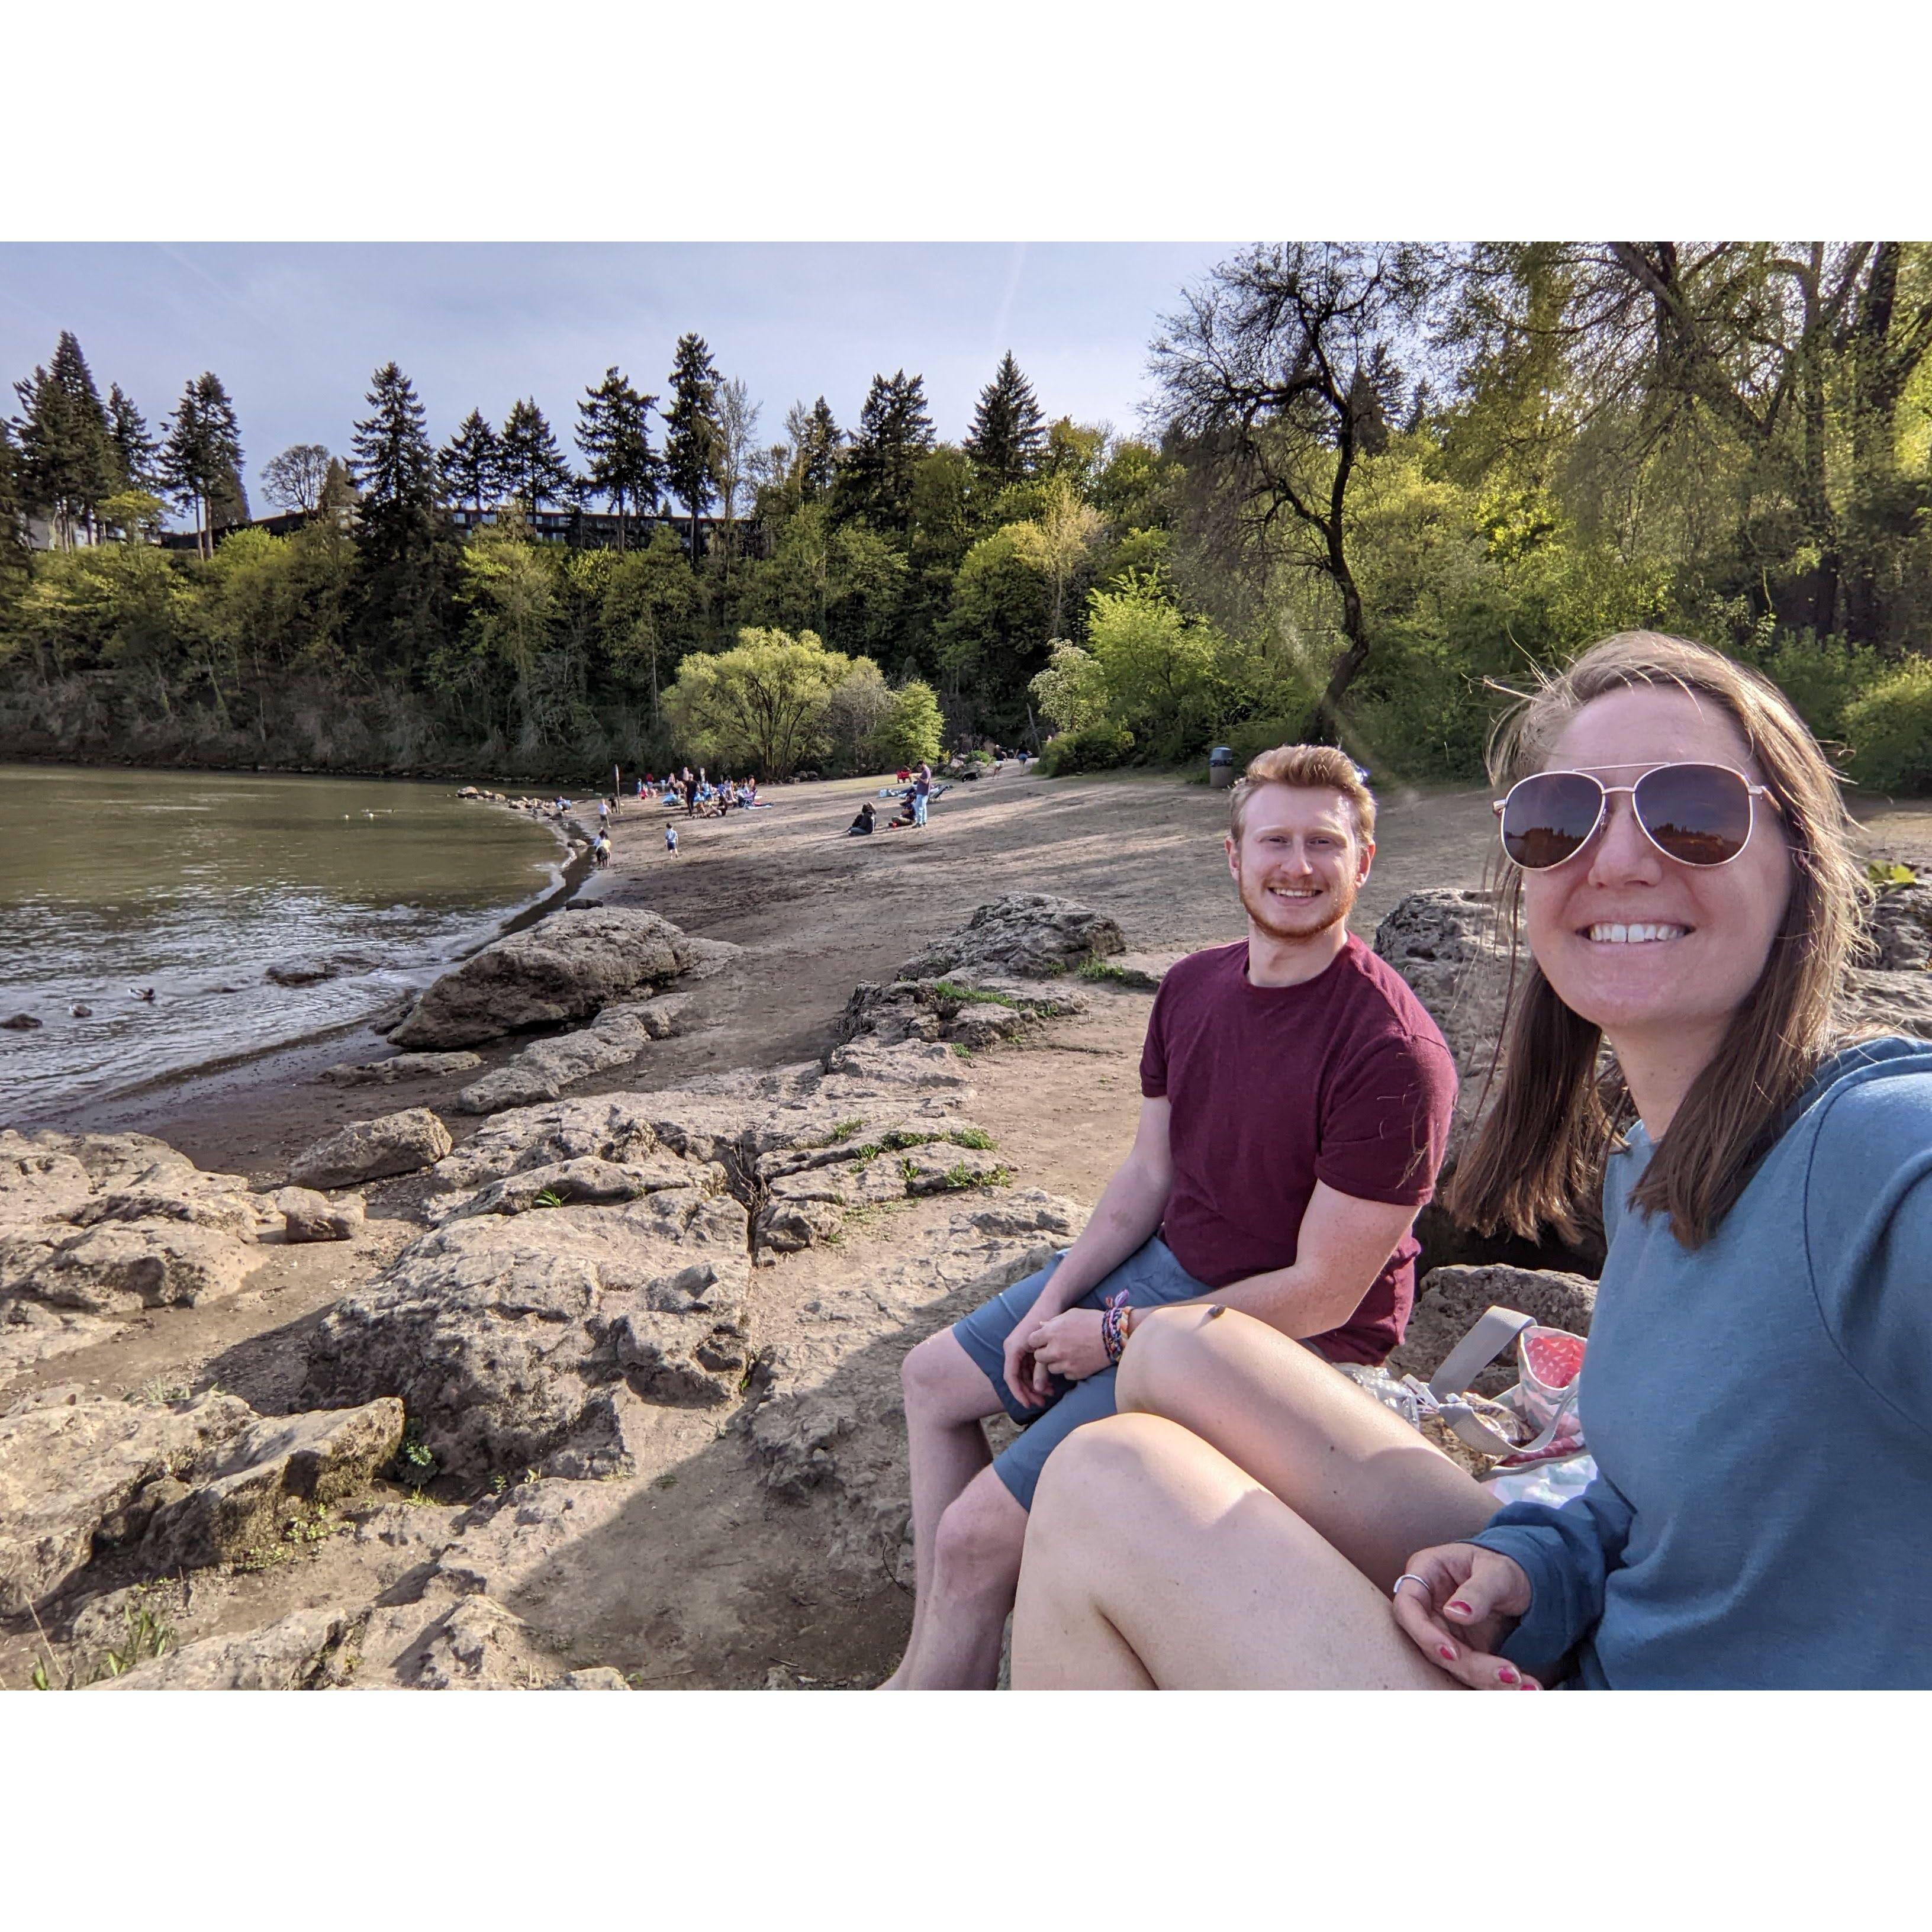 The "hometown" date where Noah showed Katie his favorite spots in Lake Oswego.